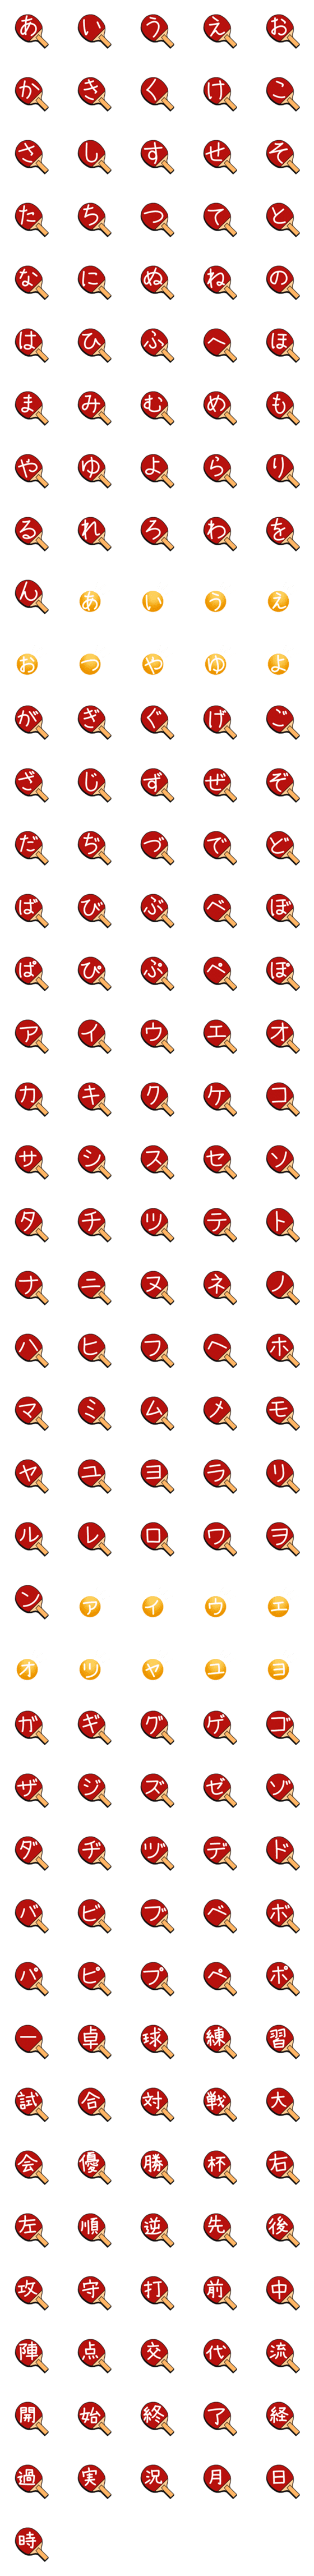 [LINE絵文字]卓球ラケット＆ボール ひらカナ漢字 201個の画像一覧